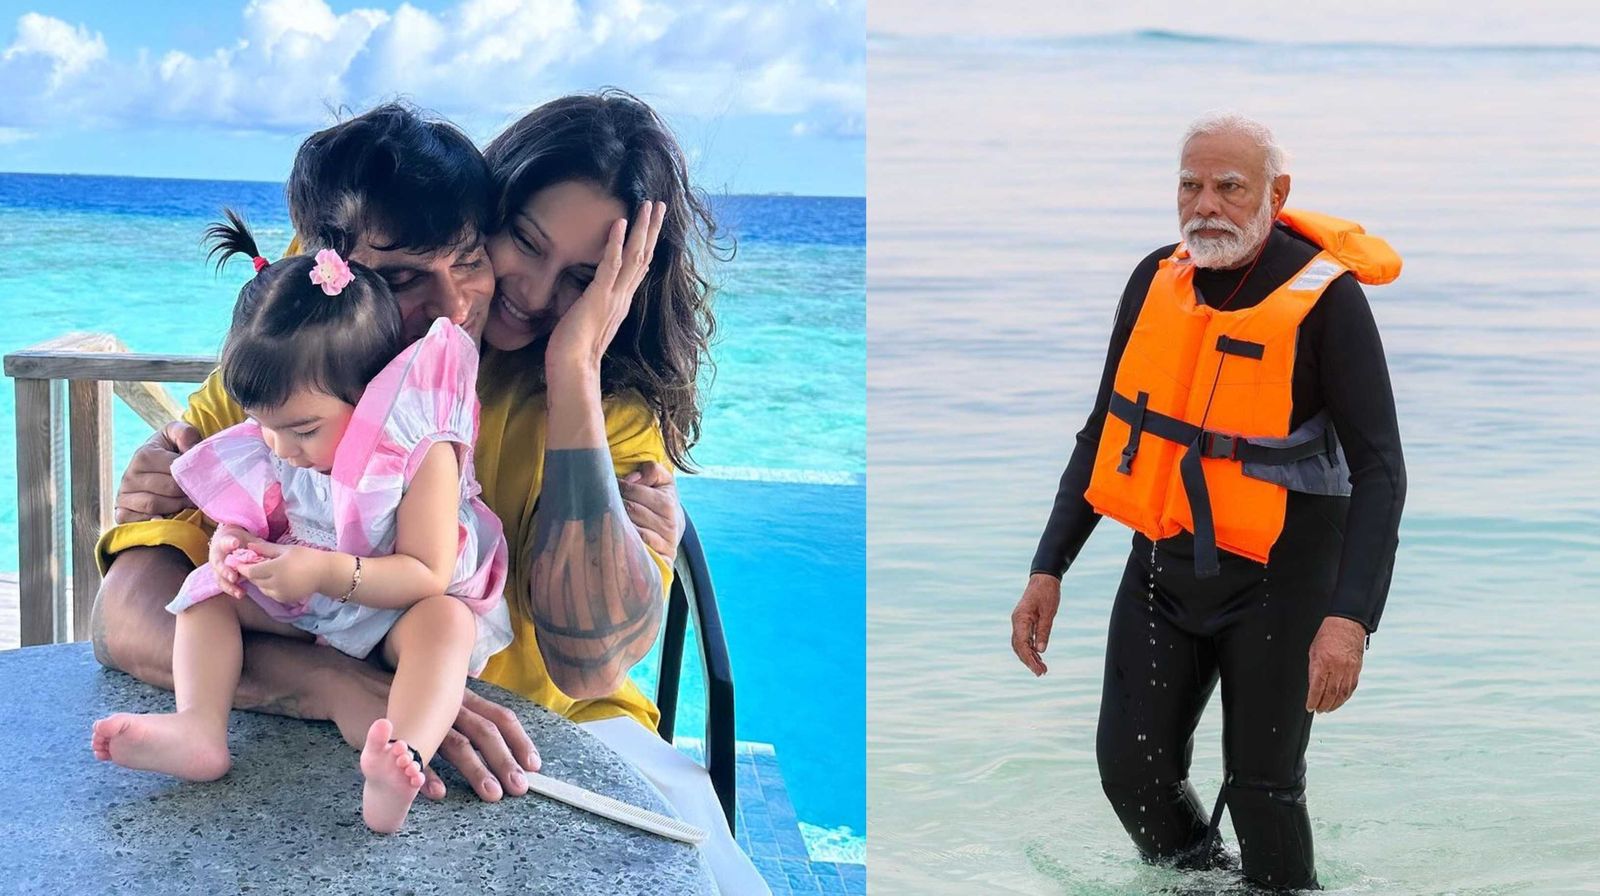 ‘Be an informed citizen’: Bipasha Basu receives flak for celebrating birthday in Maldives after PM Modi was insulted